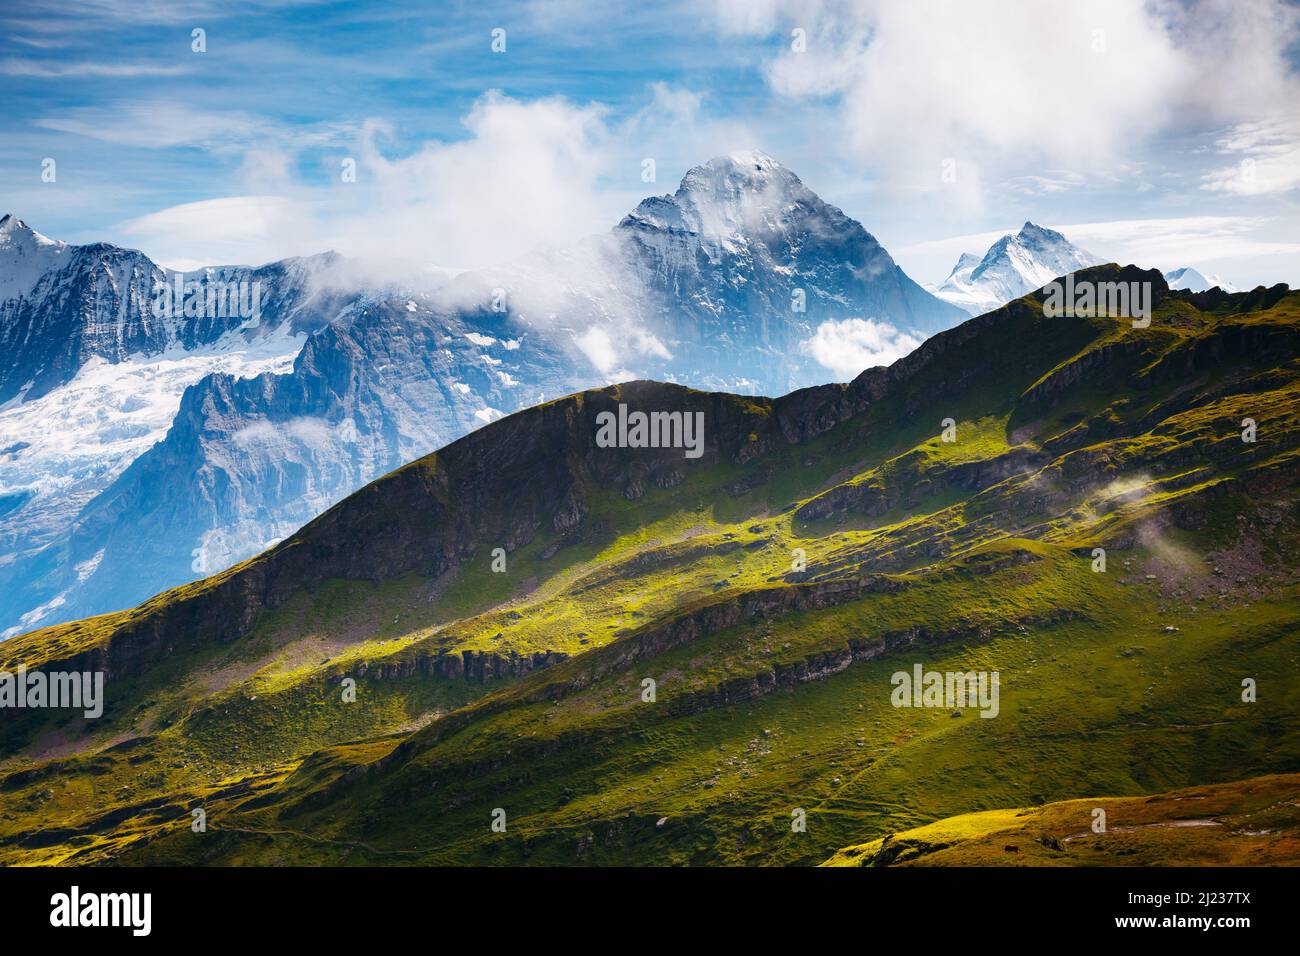 Great view of alpine hill. Picturesque and gorgeous scene. Popular tourist attraction. Location place Swiss alps, Grindelwald valley in the Bernese Ob Stock Photo